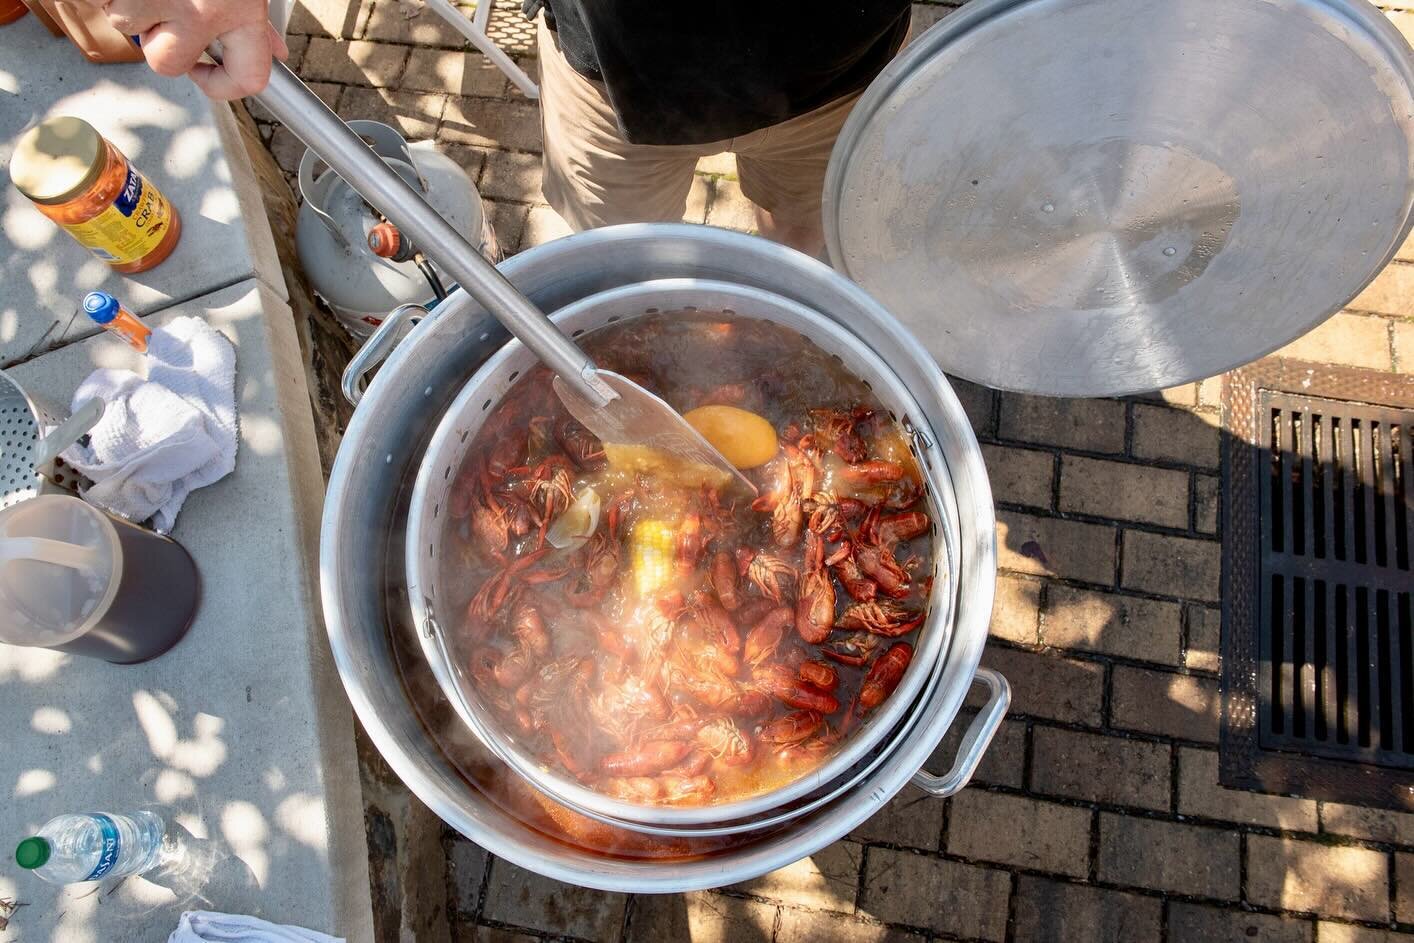 Our friends at Juneau Construction threw a crawfish boil last weekend and we were there to capture their staff enjoying every minute! 🌞🦐